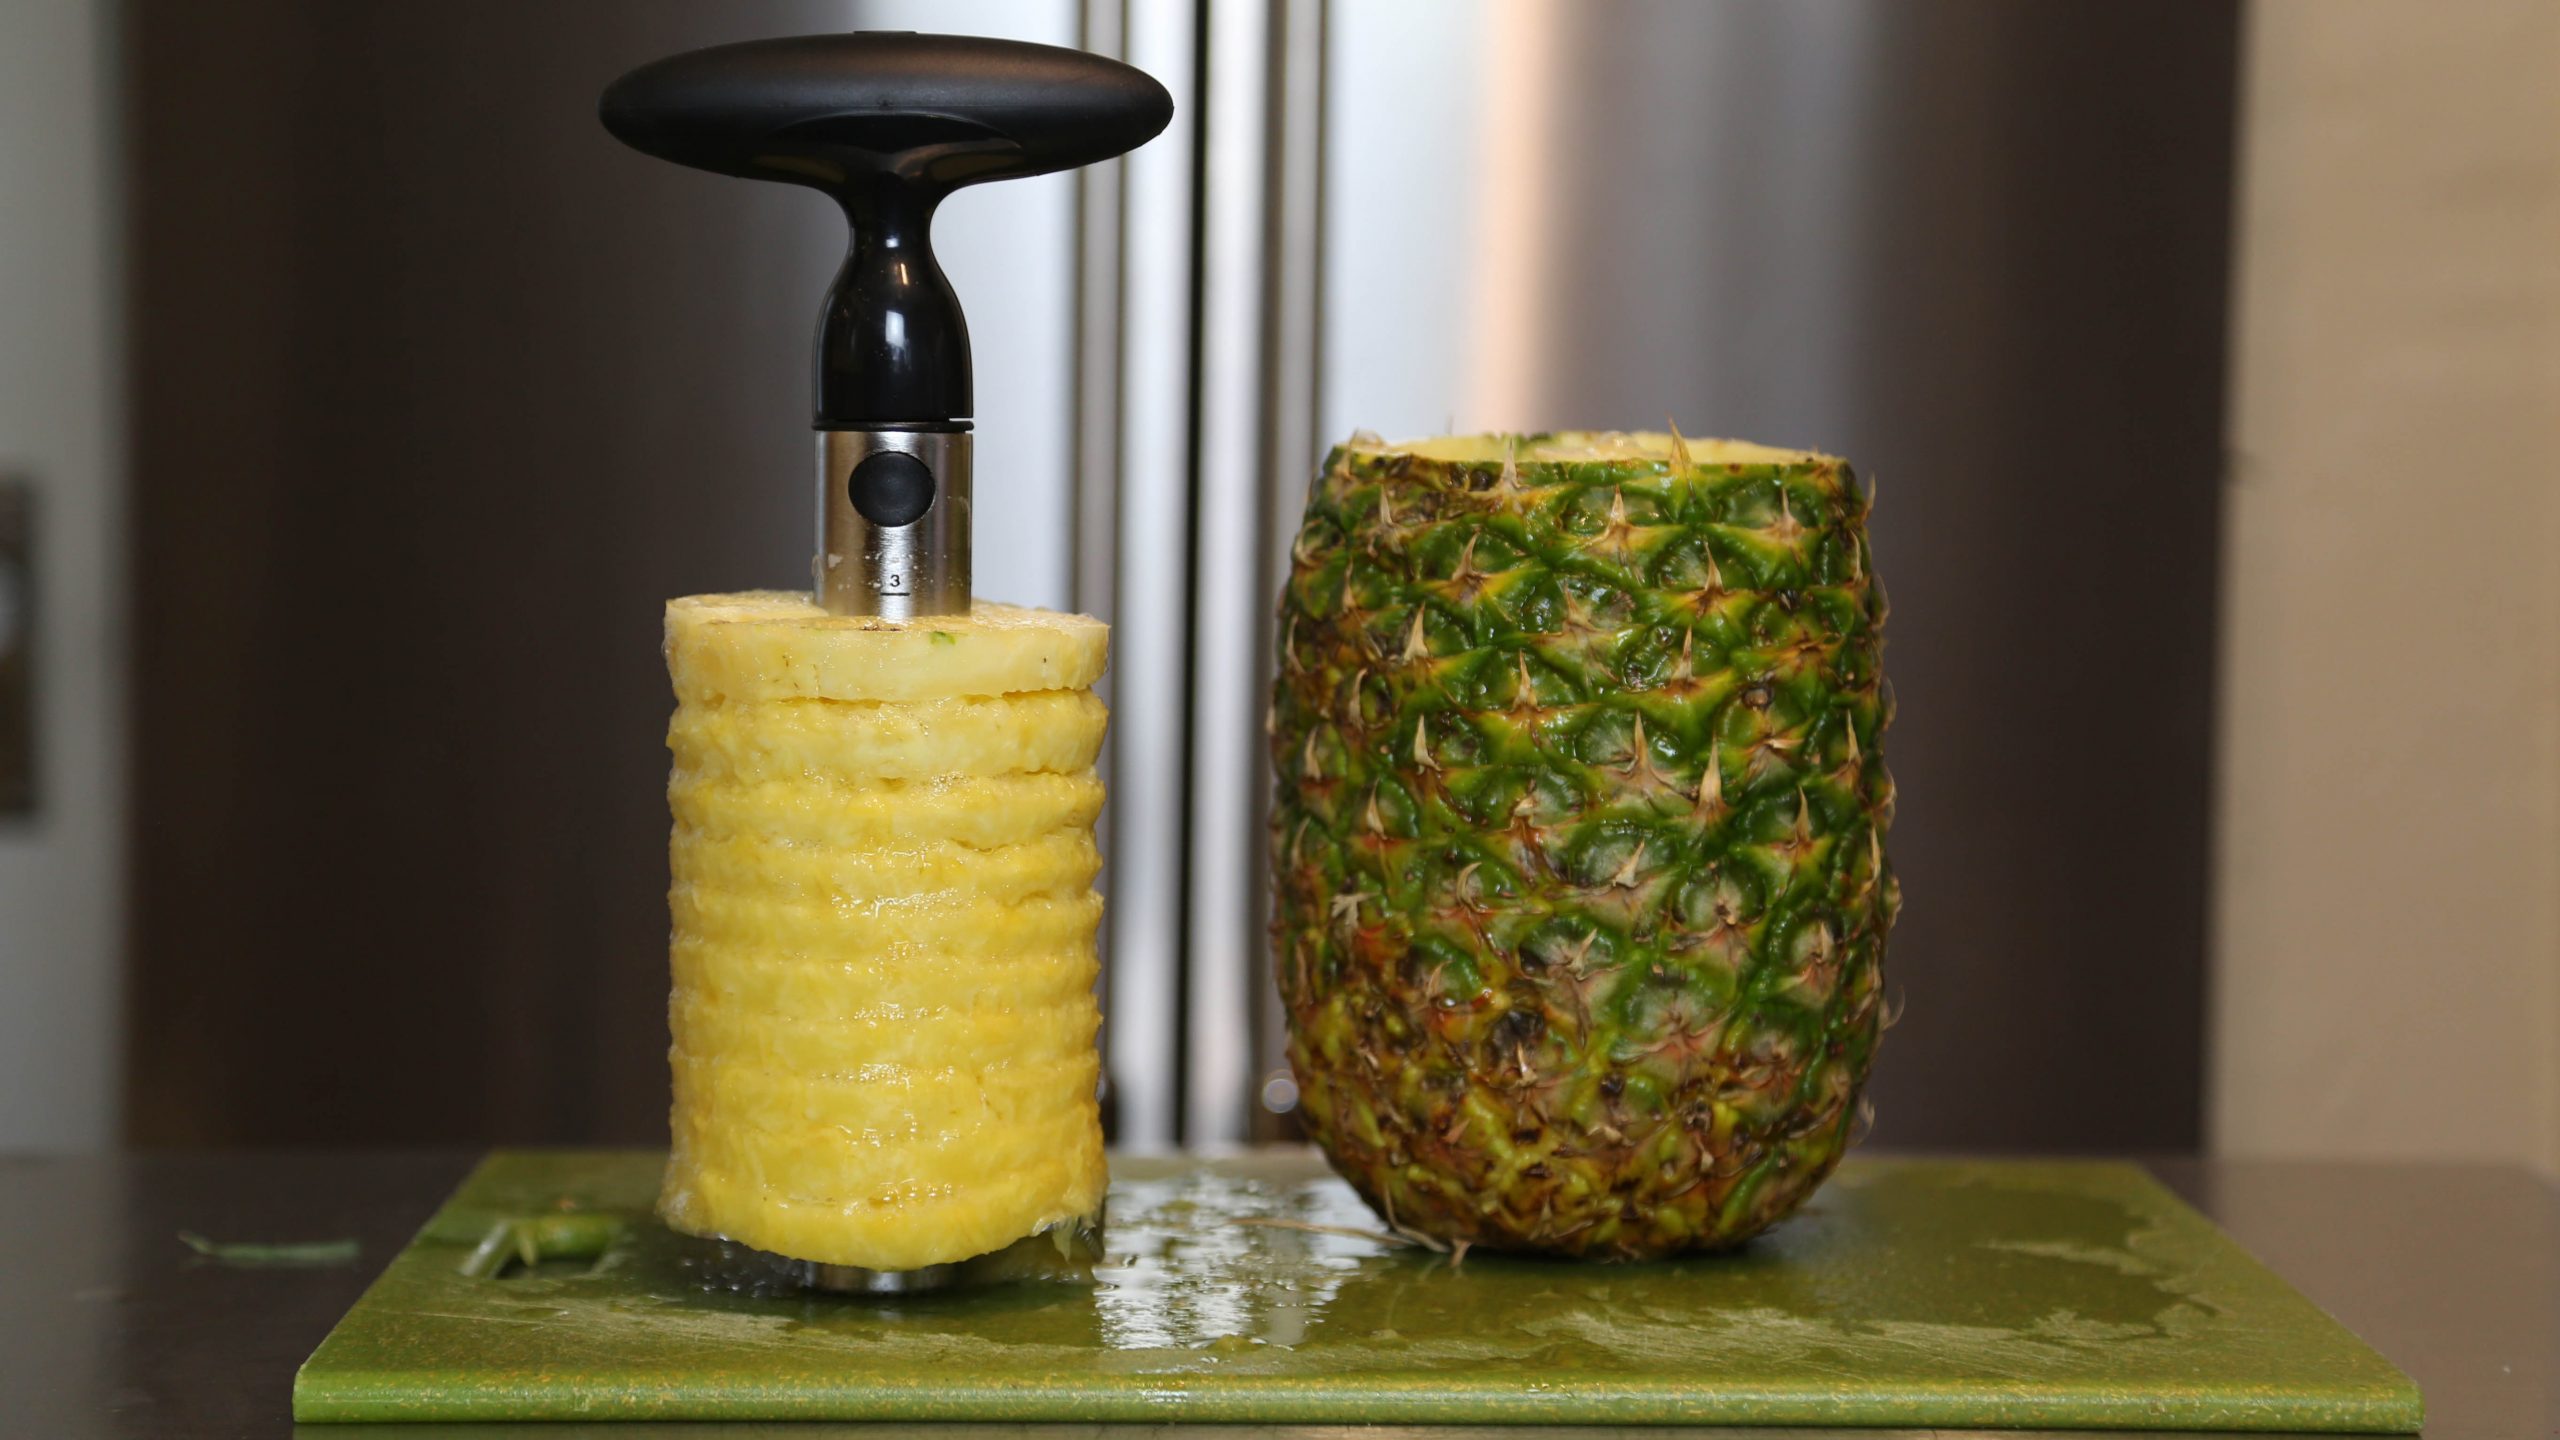 https://www.dontwasteyourmoney.com/wp-content/uploads/2020/04/pineapple-corer-oxo-good-grips-final-review-ub-1-scaled.jpg